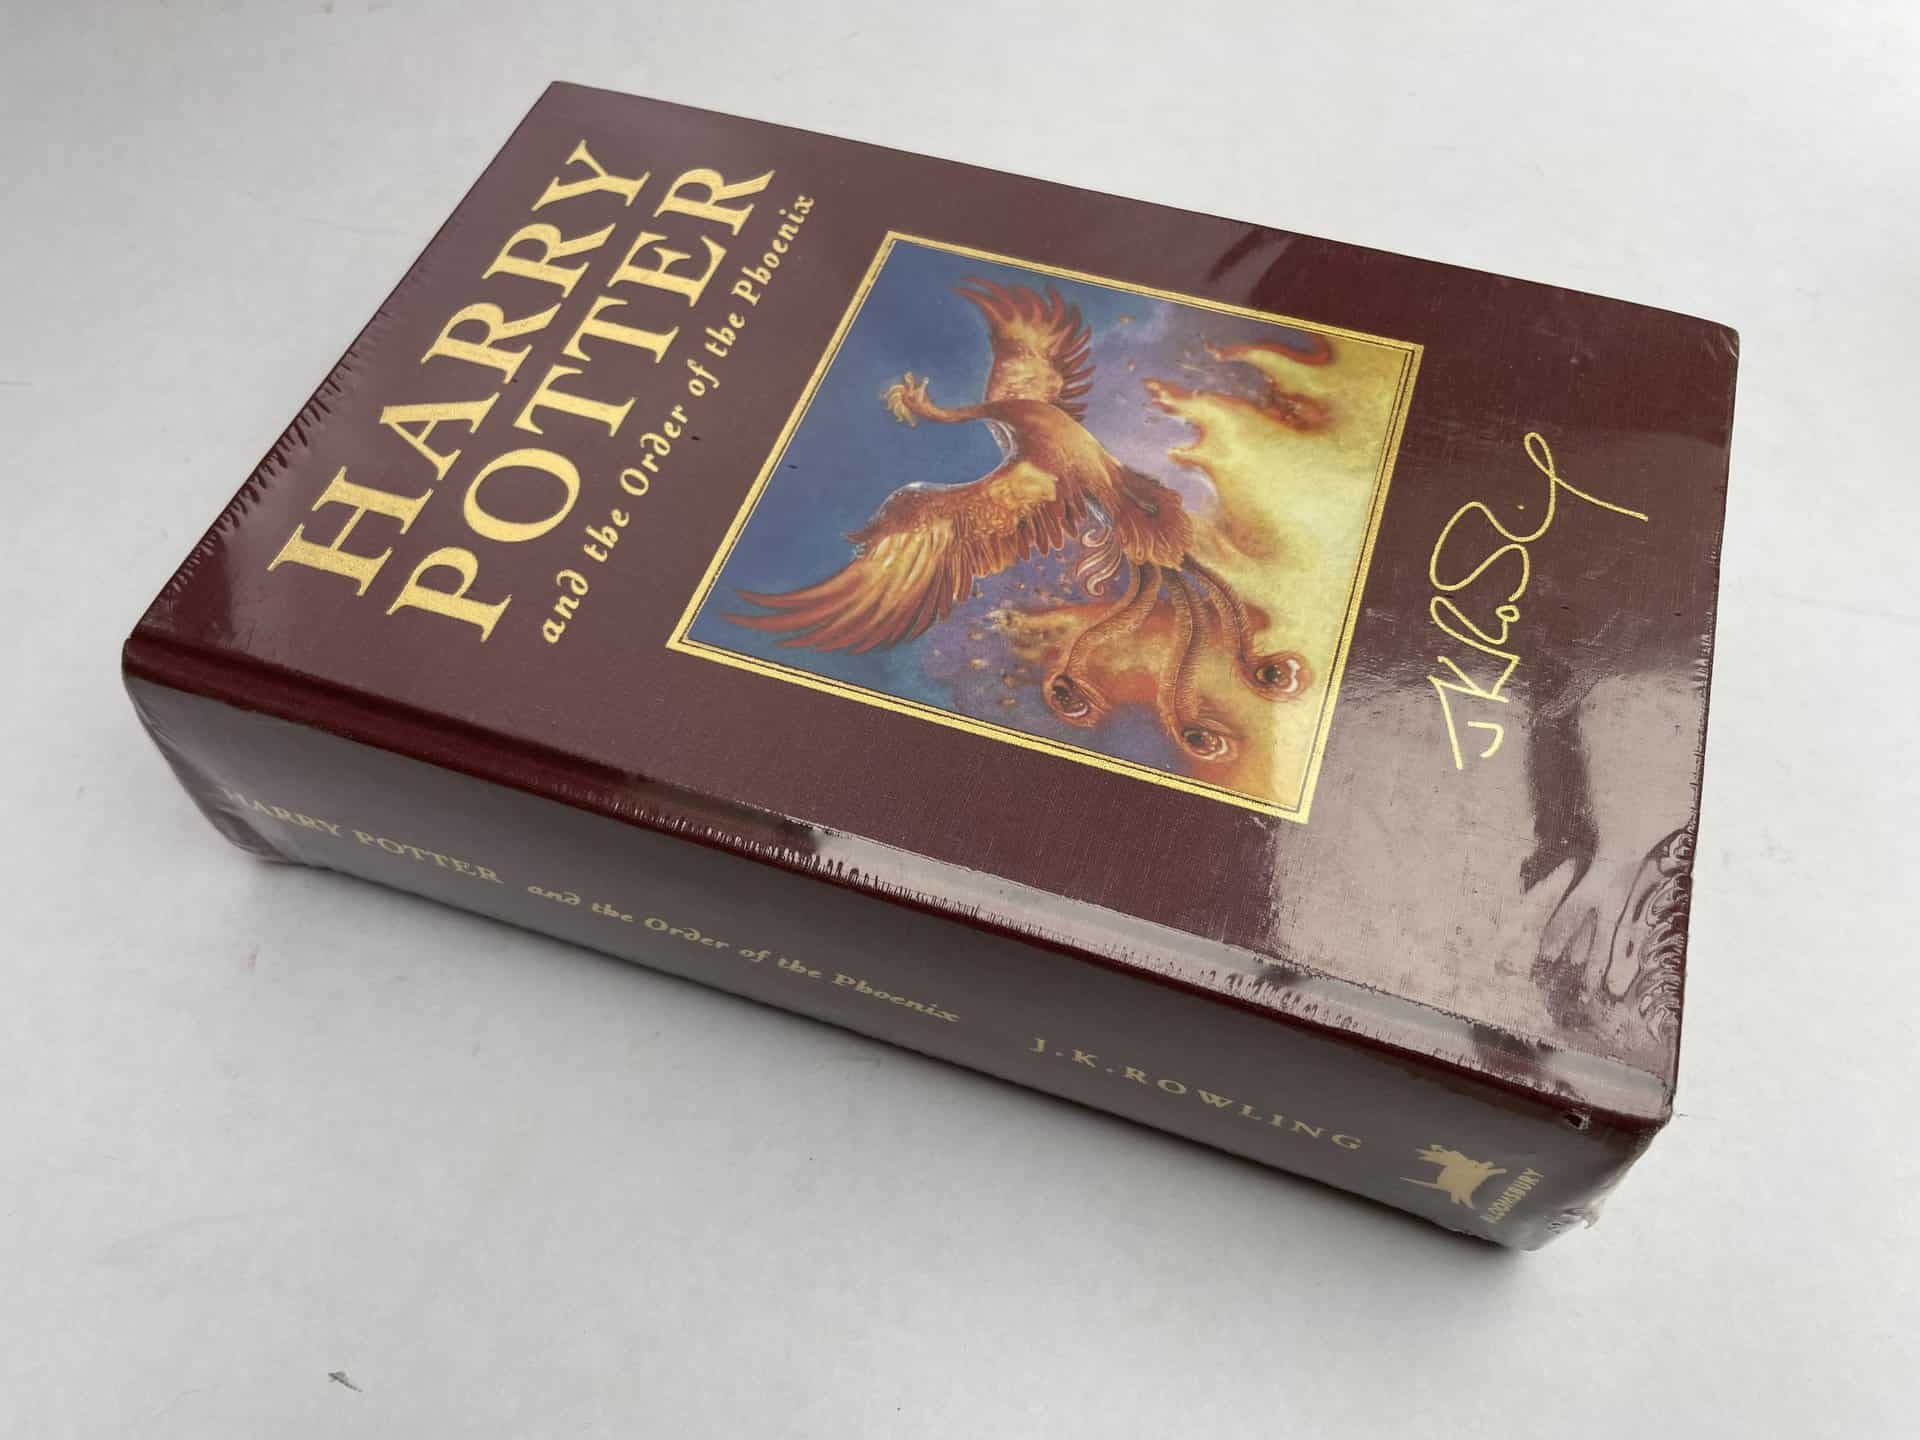 jk rowling hpatooto deluxe ed2